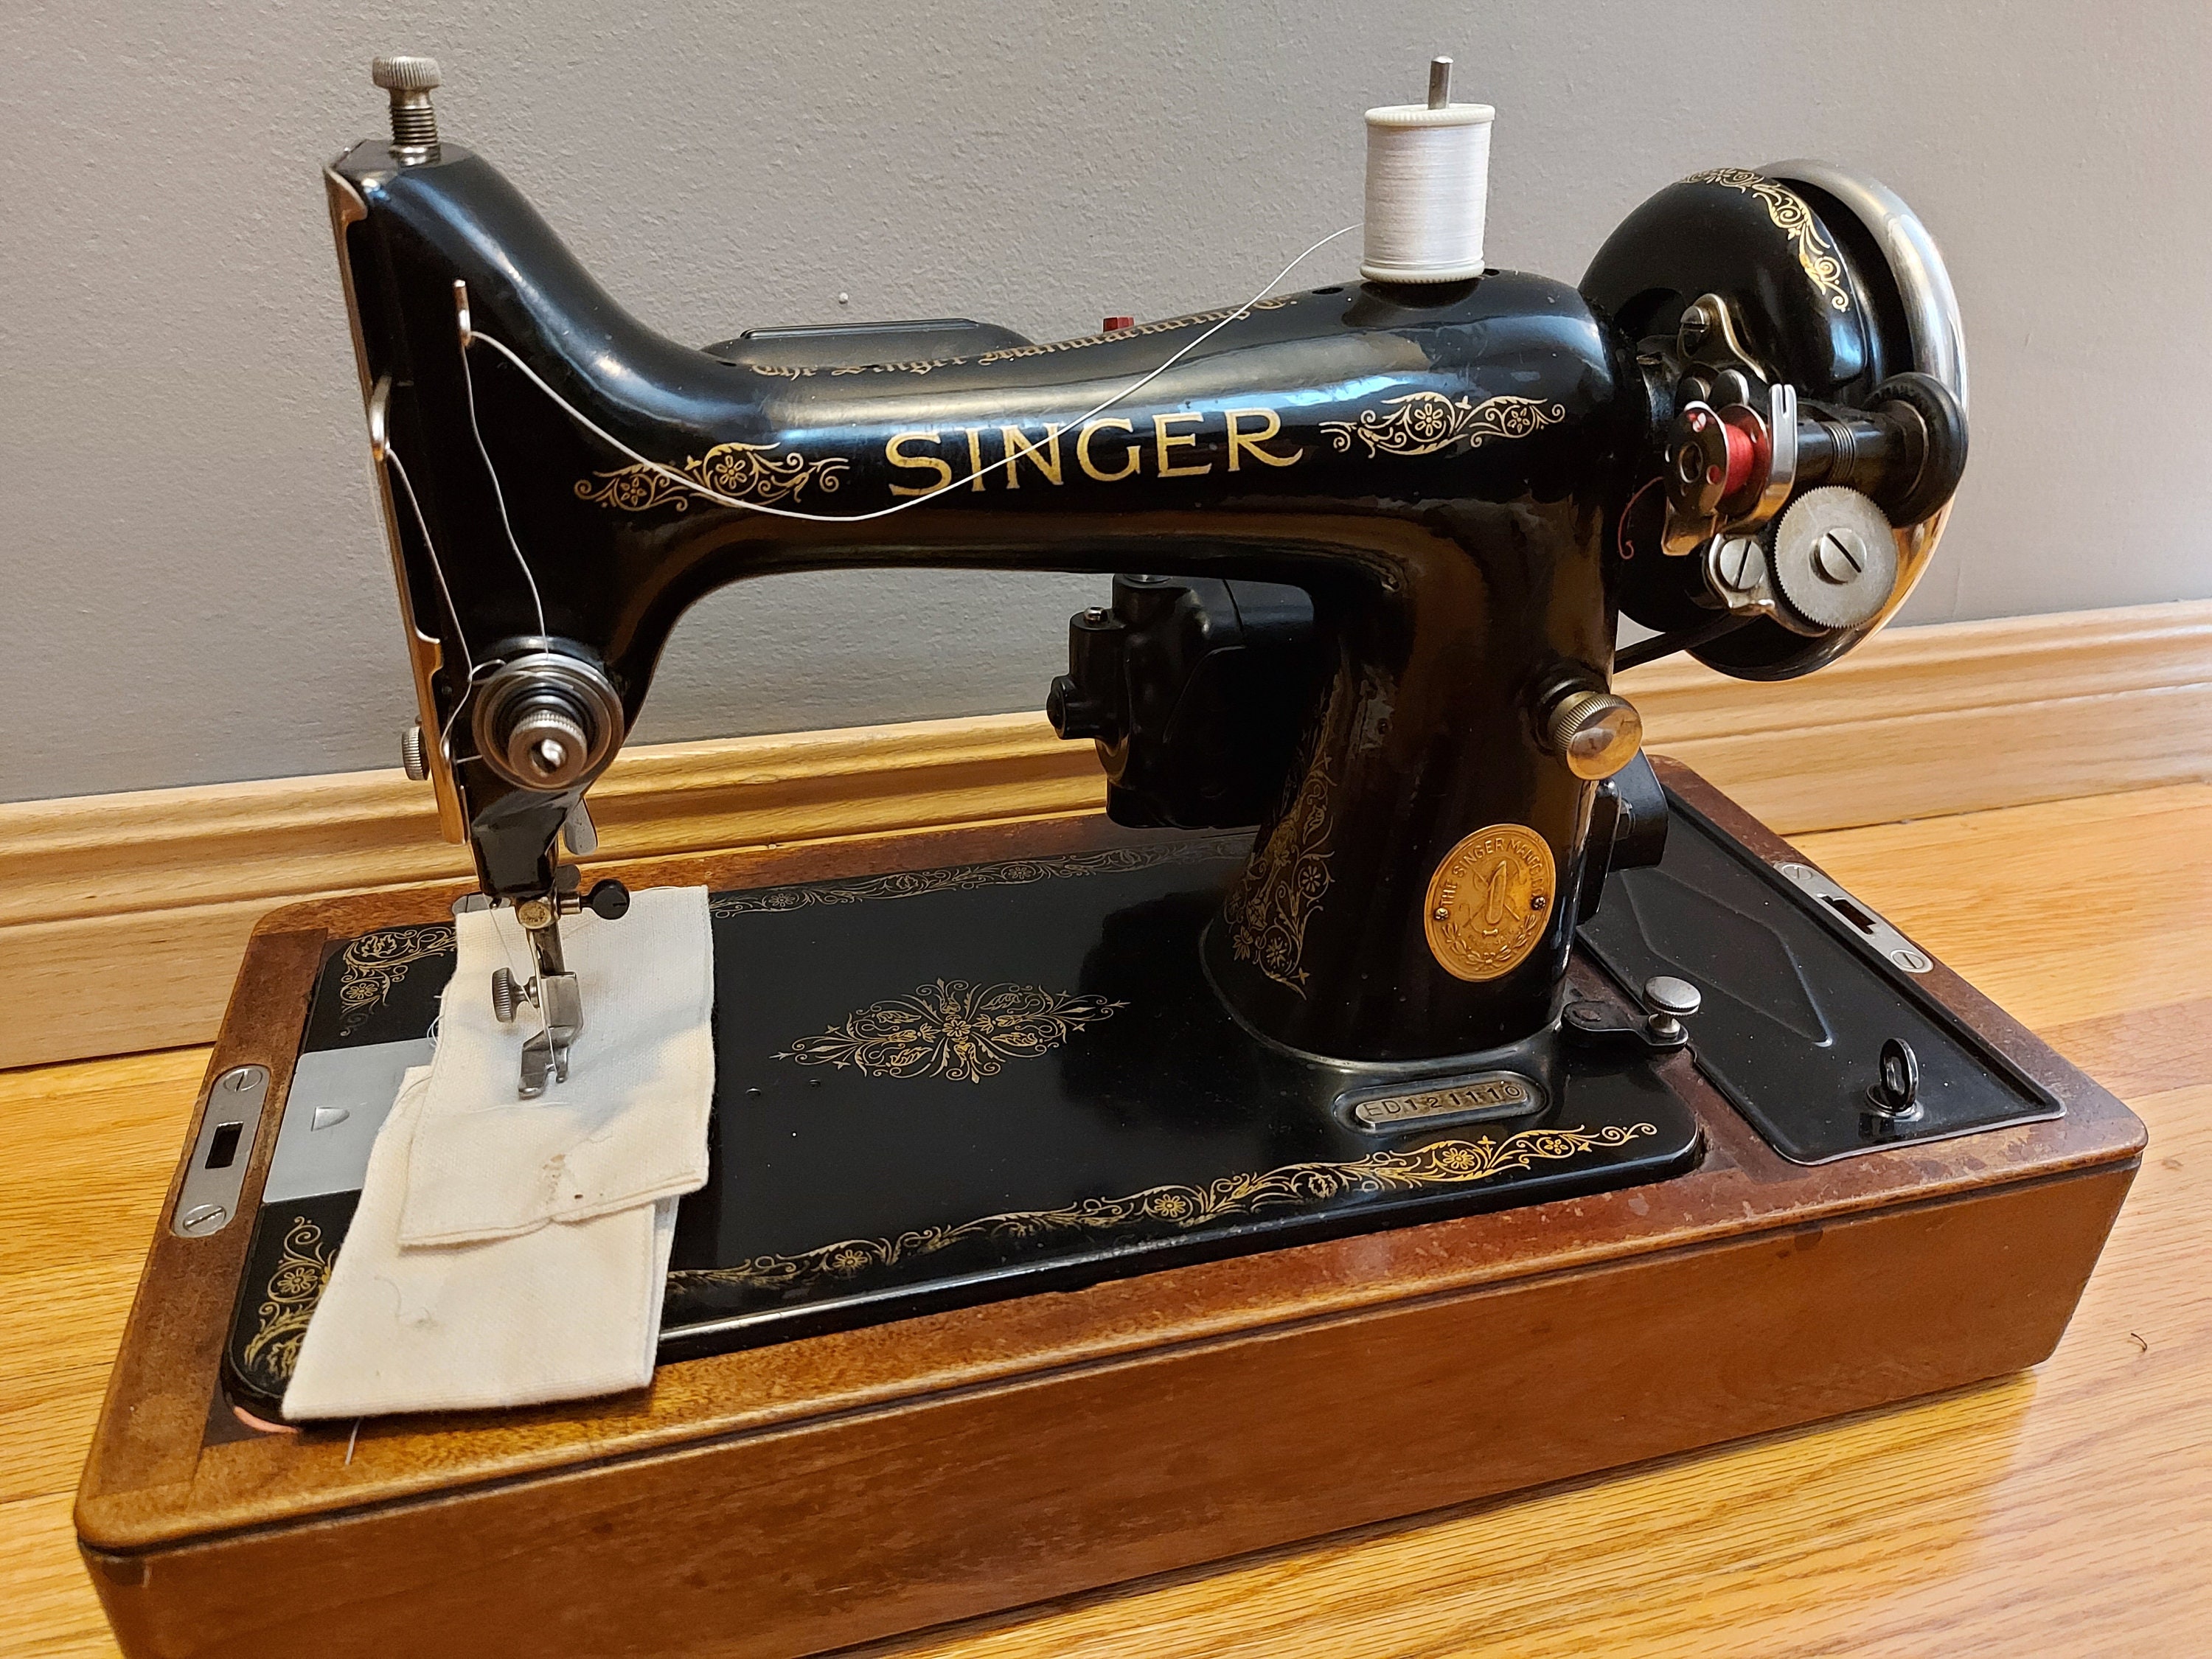 1941 Singer 99k Electric Sewing Machine Fully Operational With Etsy